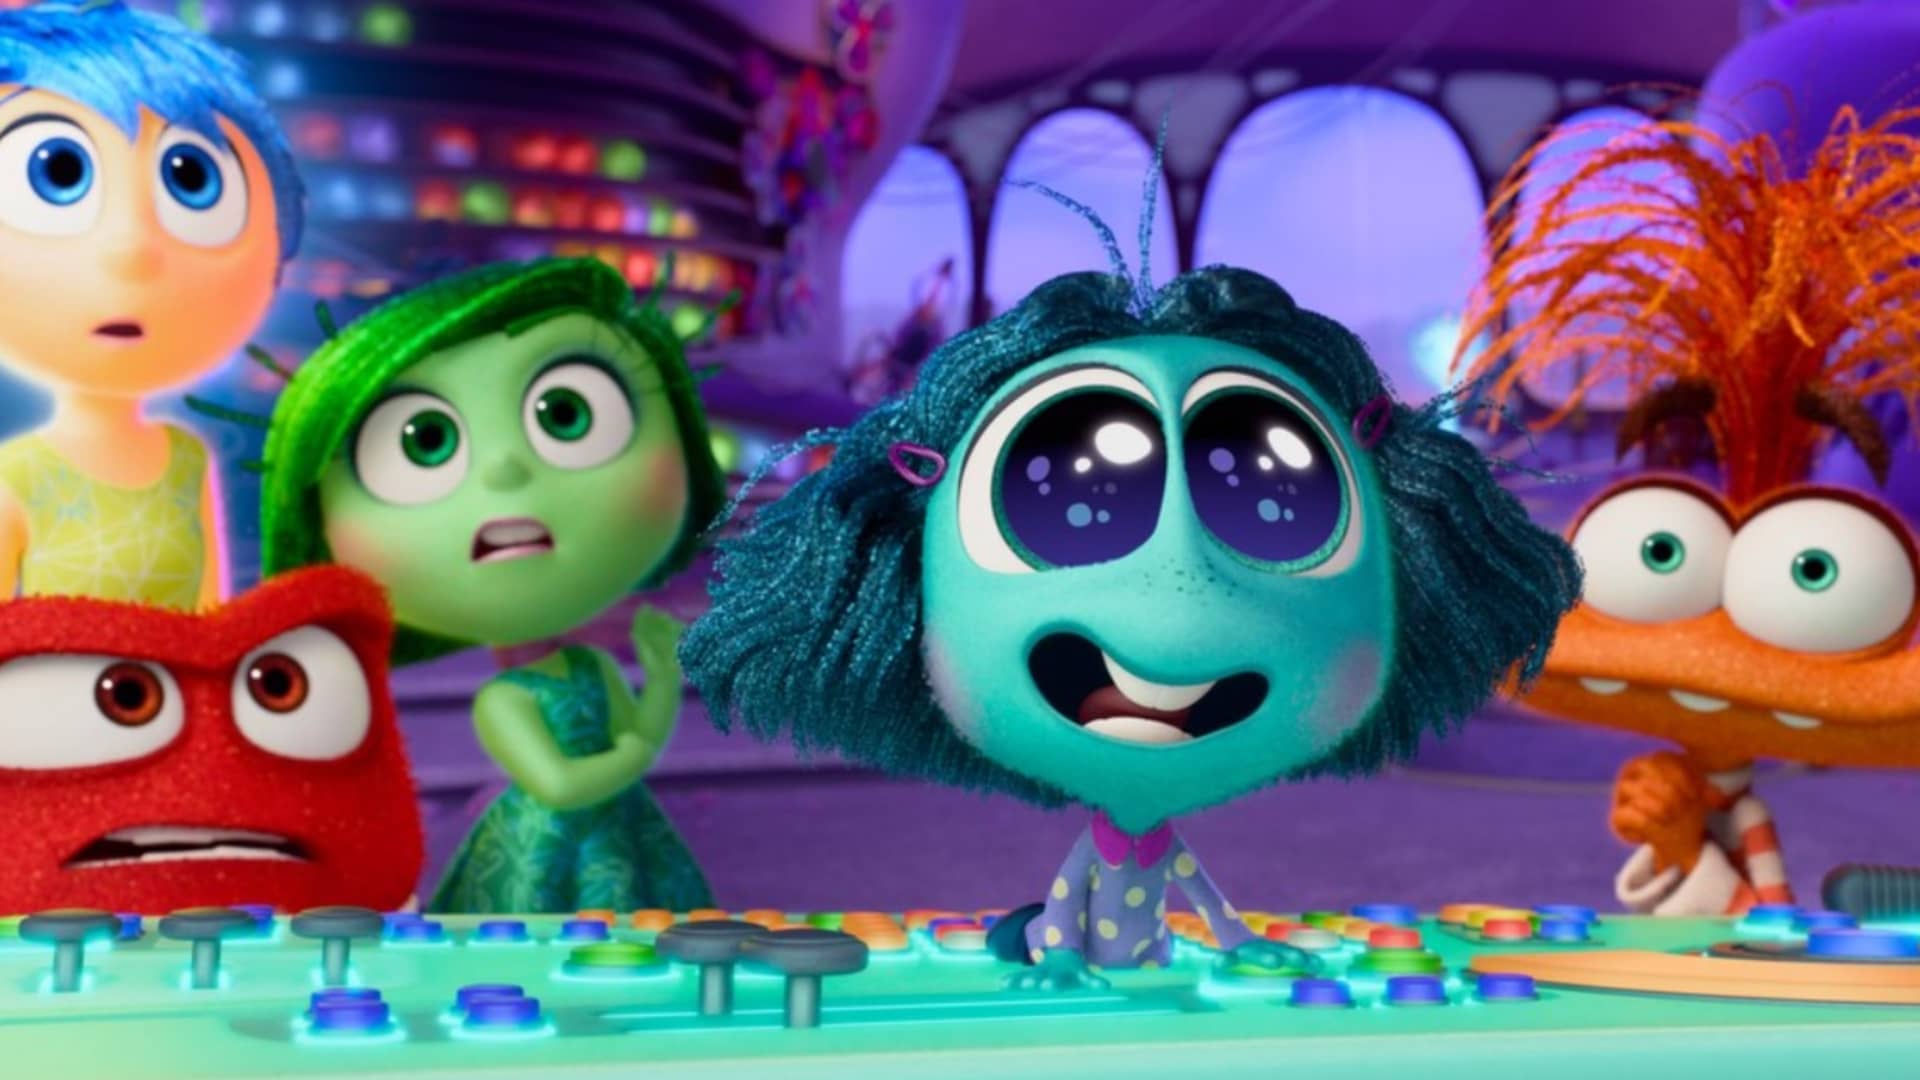 'Inside Out 2' arrives in theaters for an increasingly rare 100-day run